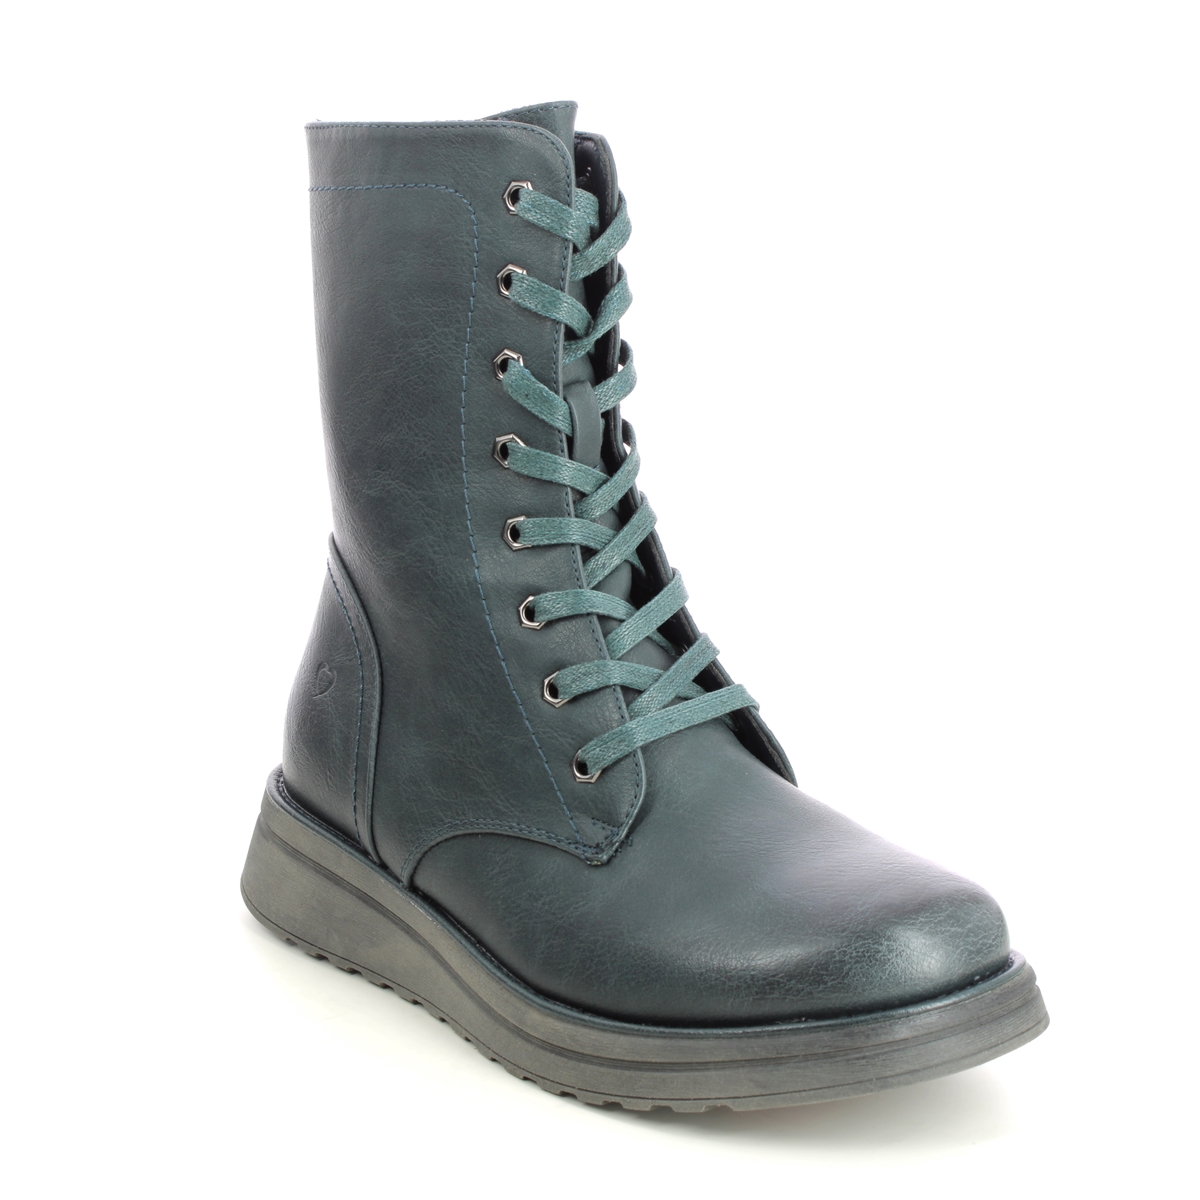 Heavenly Feet Martina Walker Teal Blue Womens Lace Up Boots 3509-73 In Size 6 In Plain Teal Blue